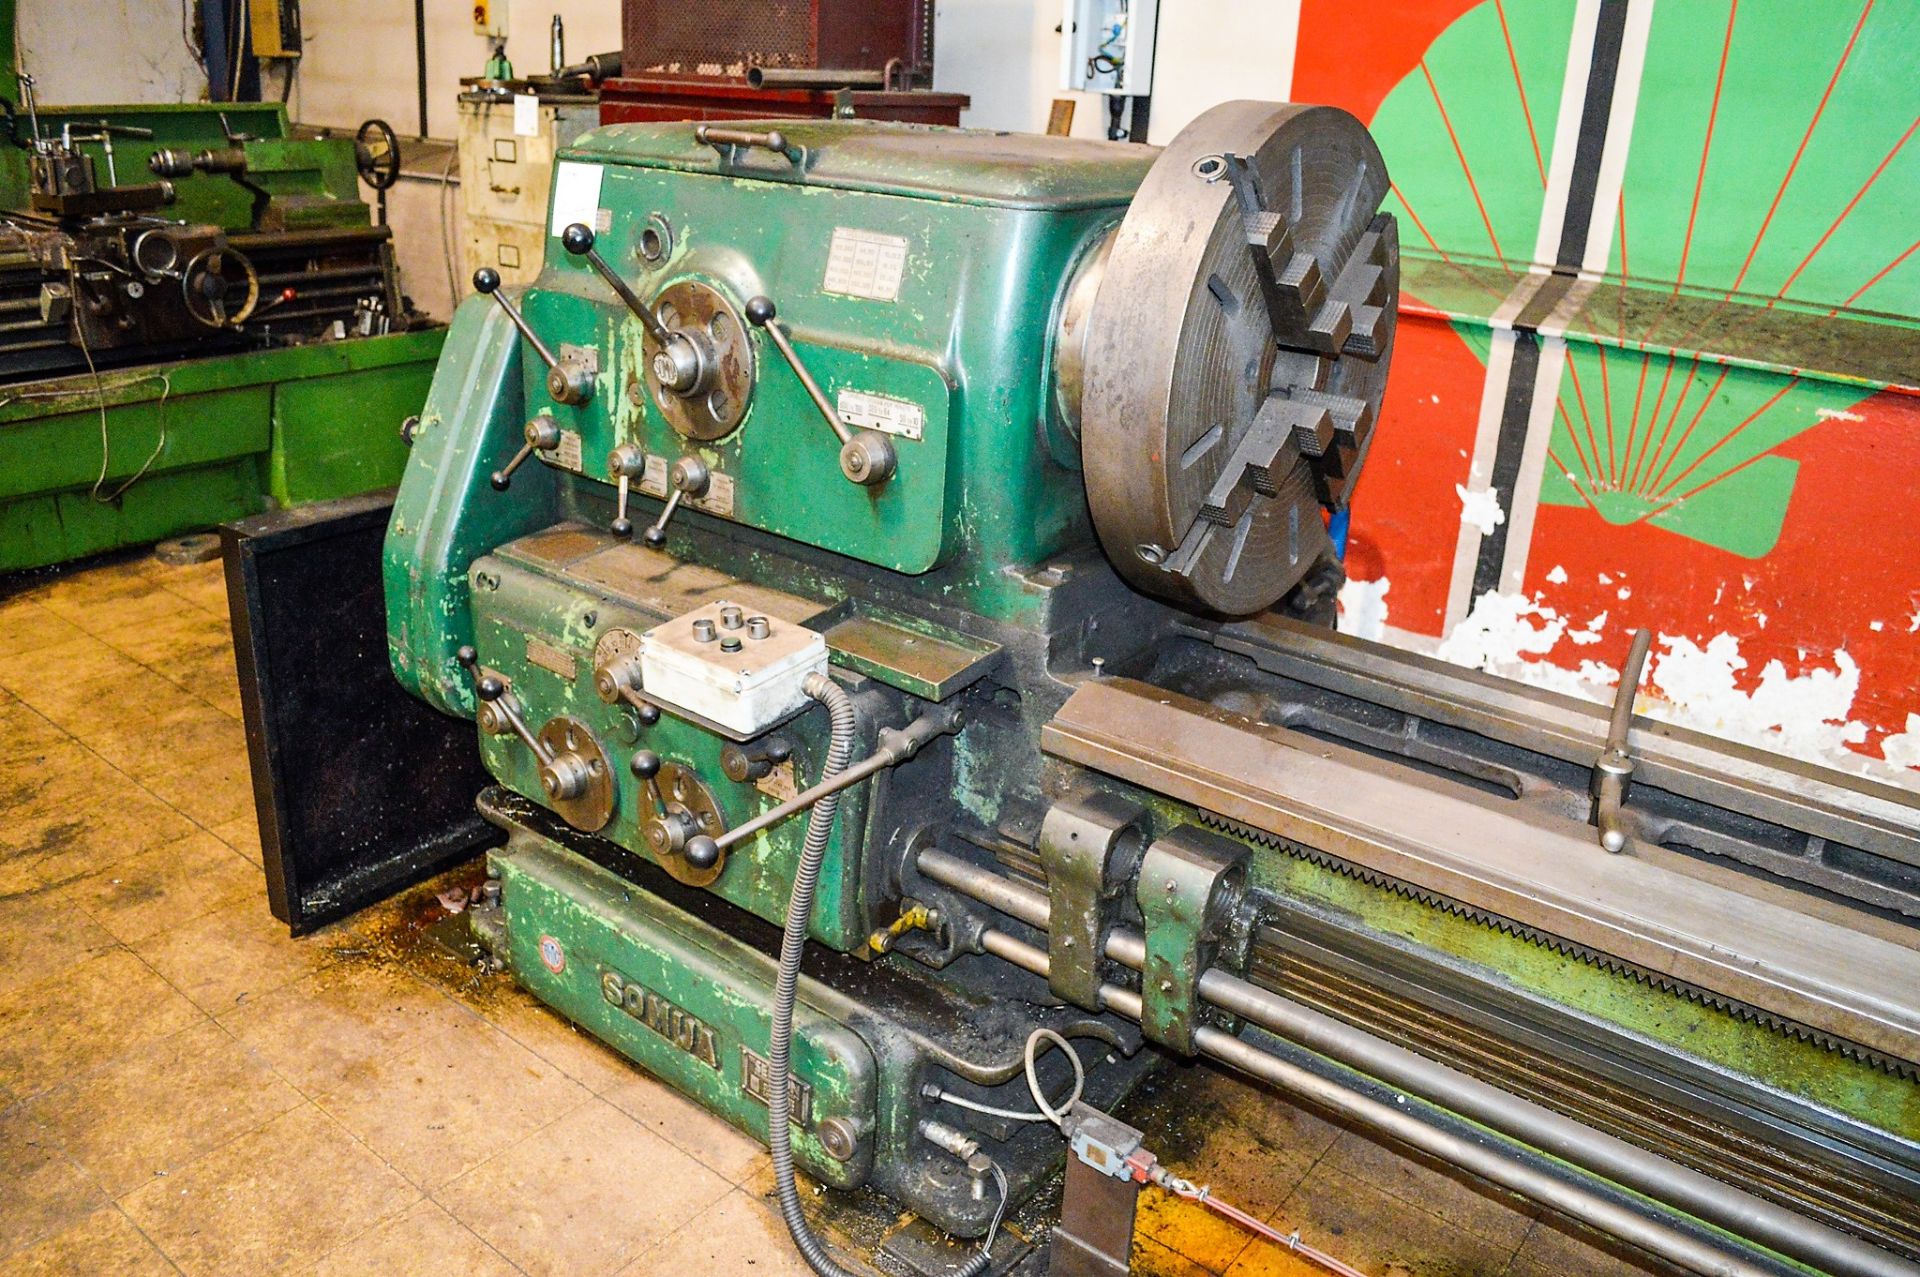 Somua straight bed centre lathe 15 inch swing over bed, 31 foot between centres c/w 3 - fixed - Image 4 of 5